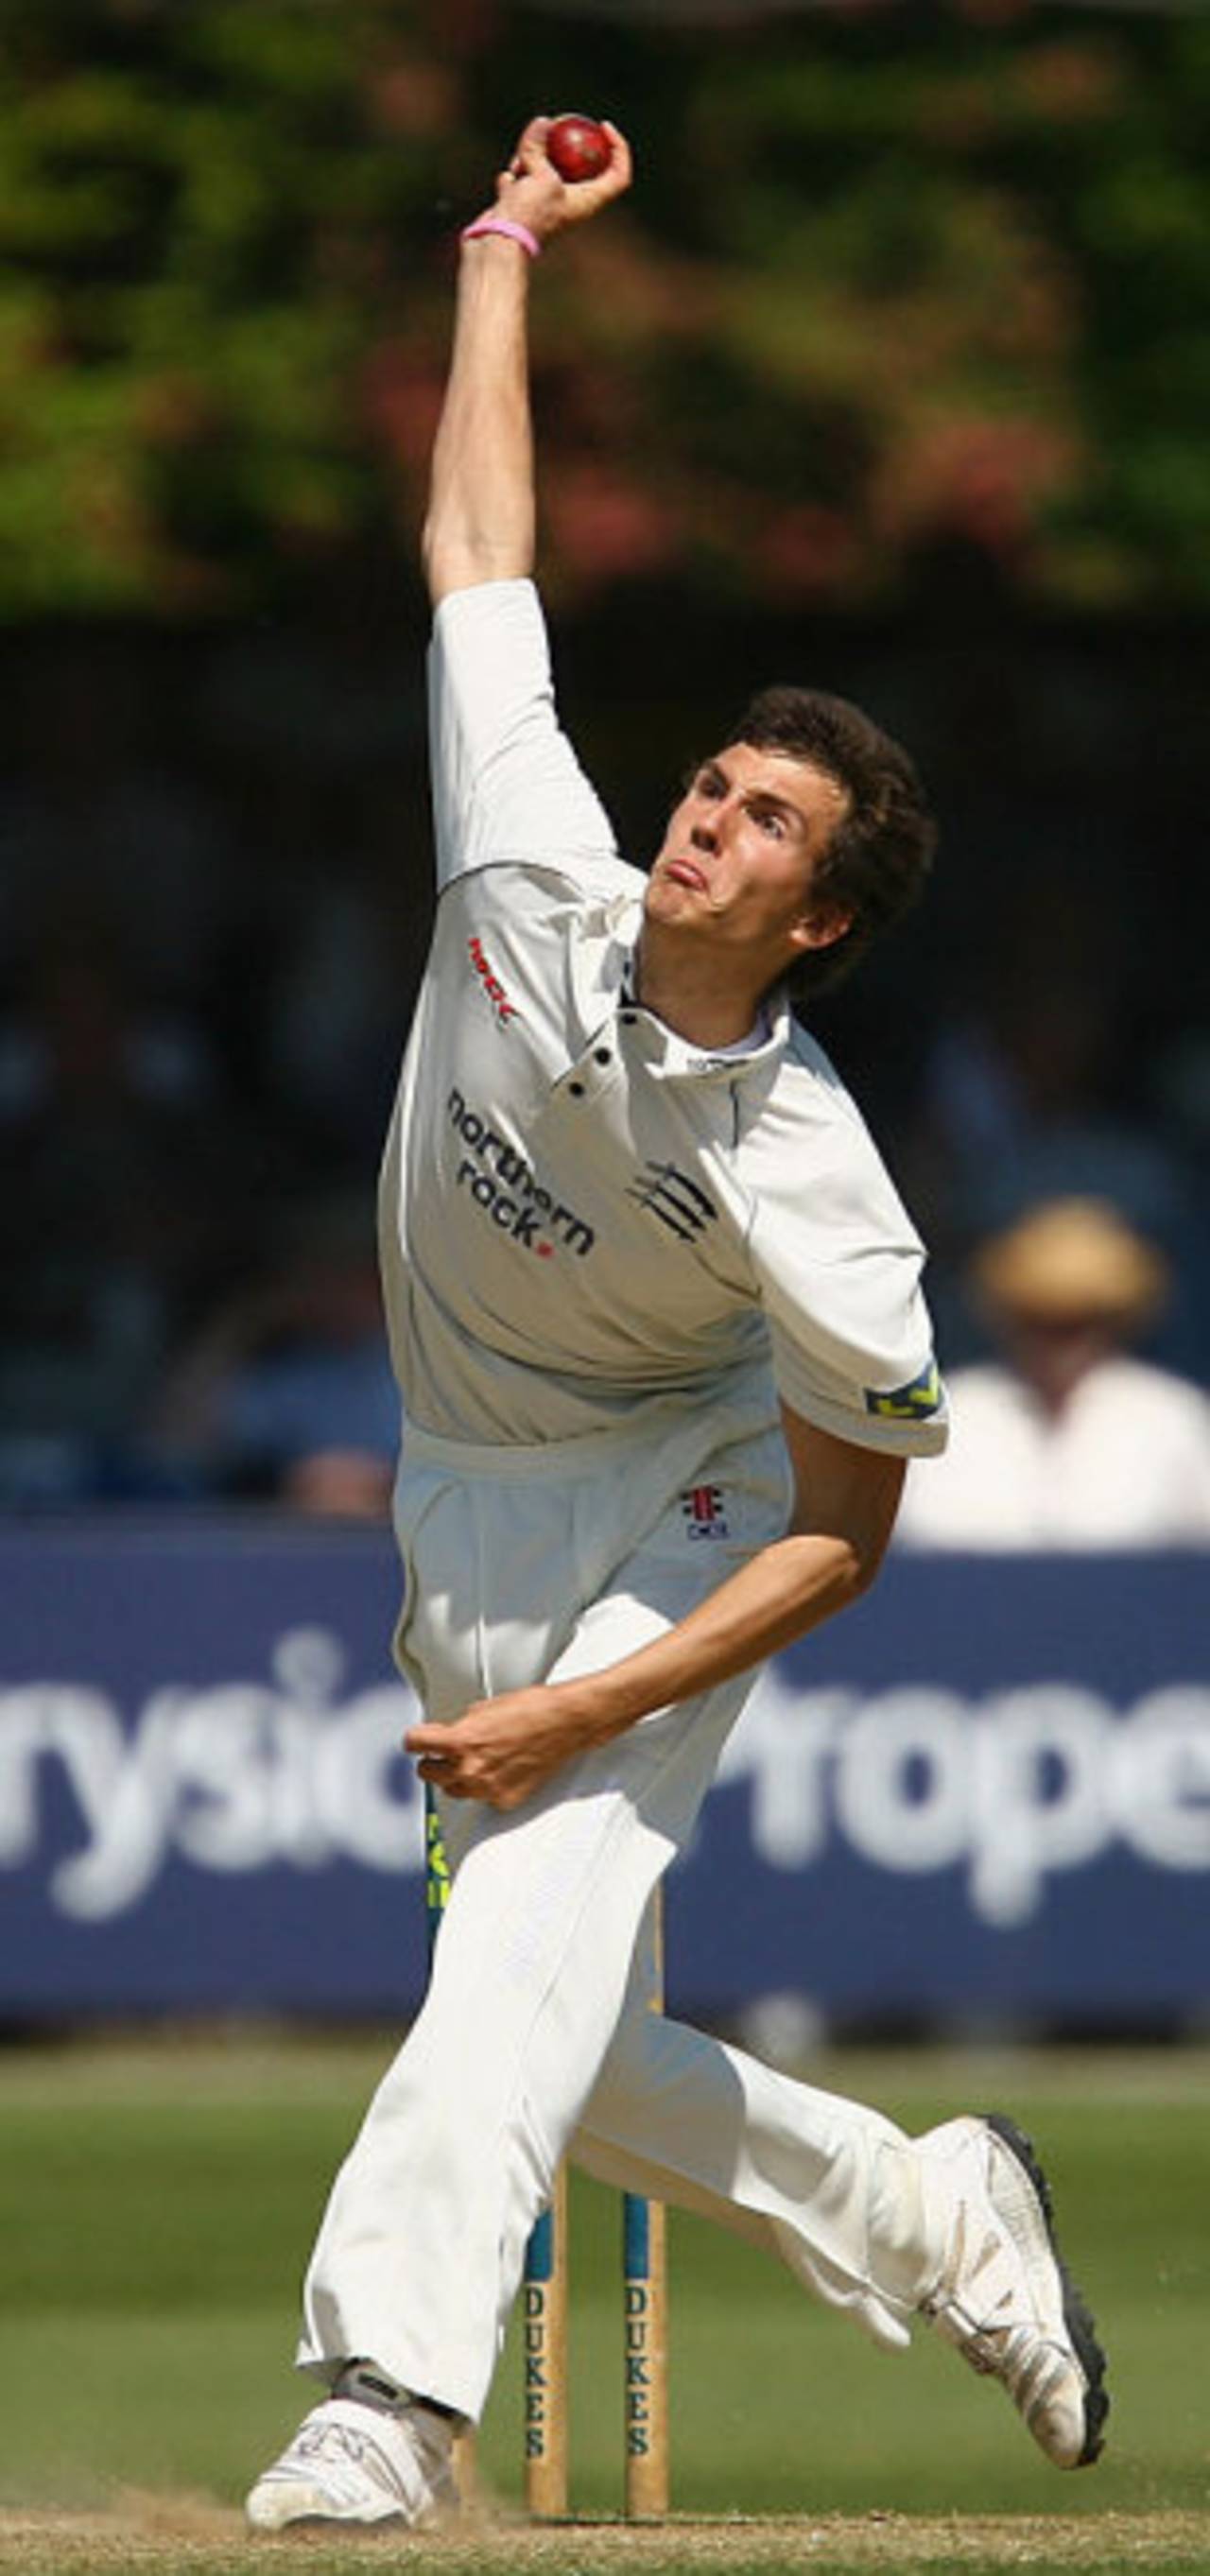 Steven Finn in his delivery stride, Essex v Middlesex, Chelmsford, May 8, 2008